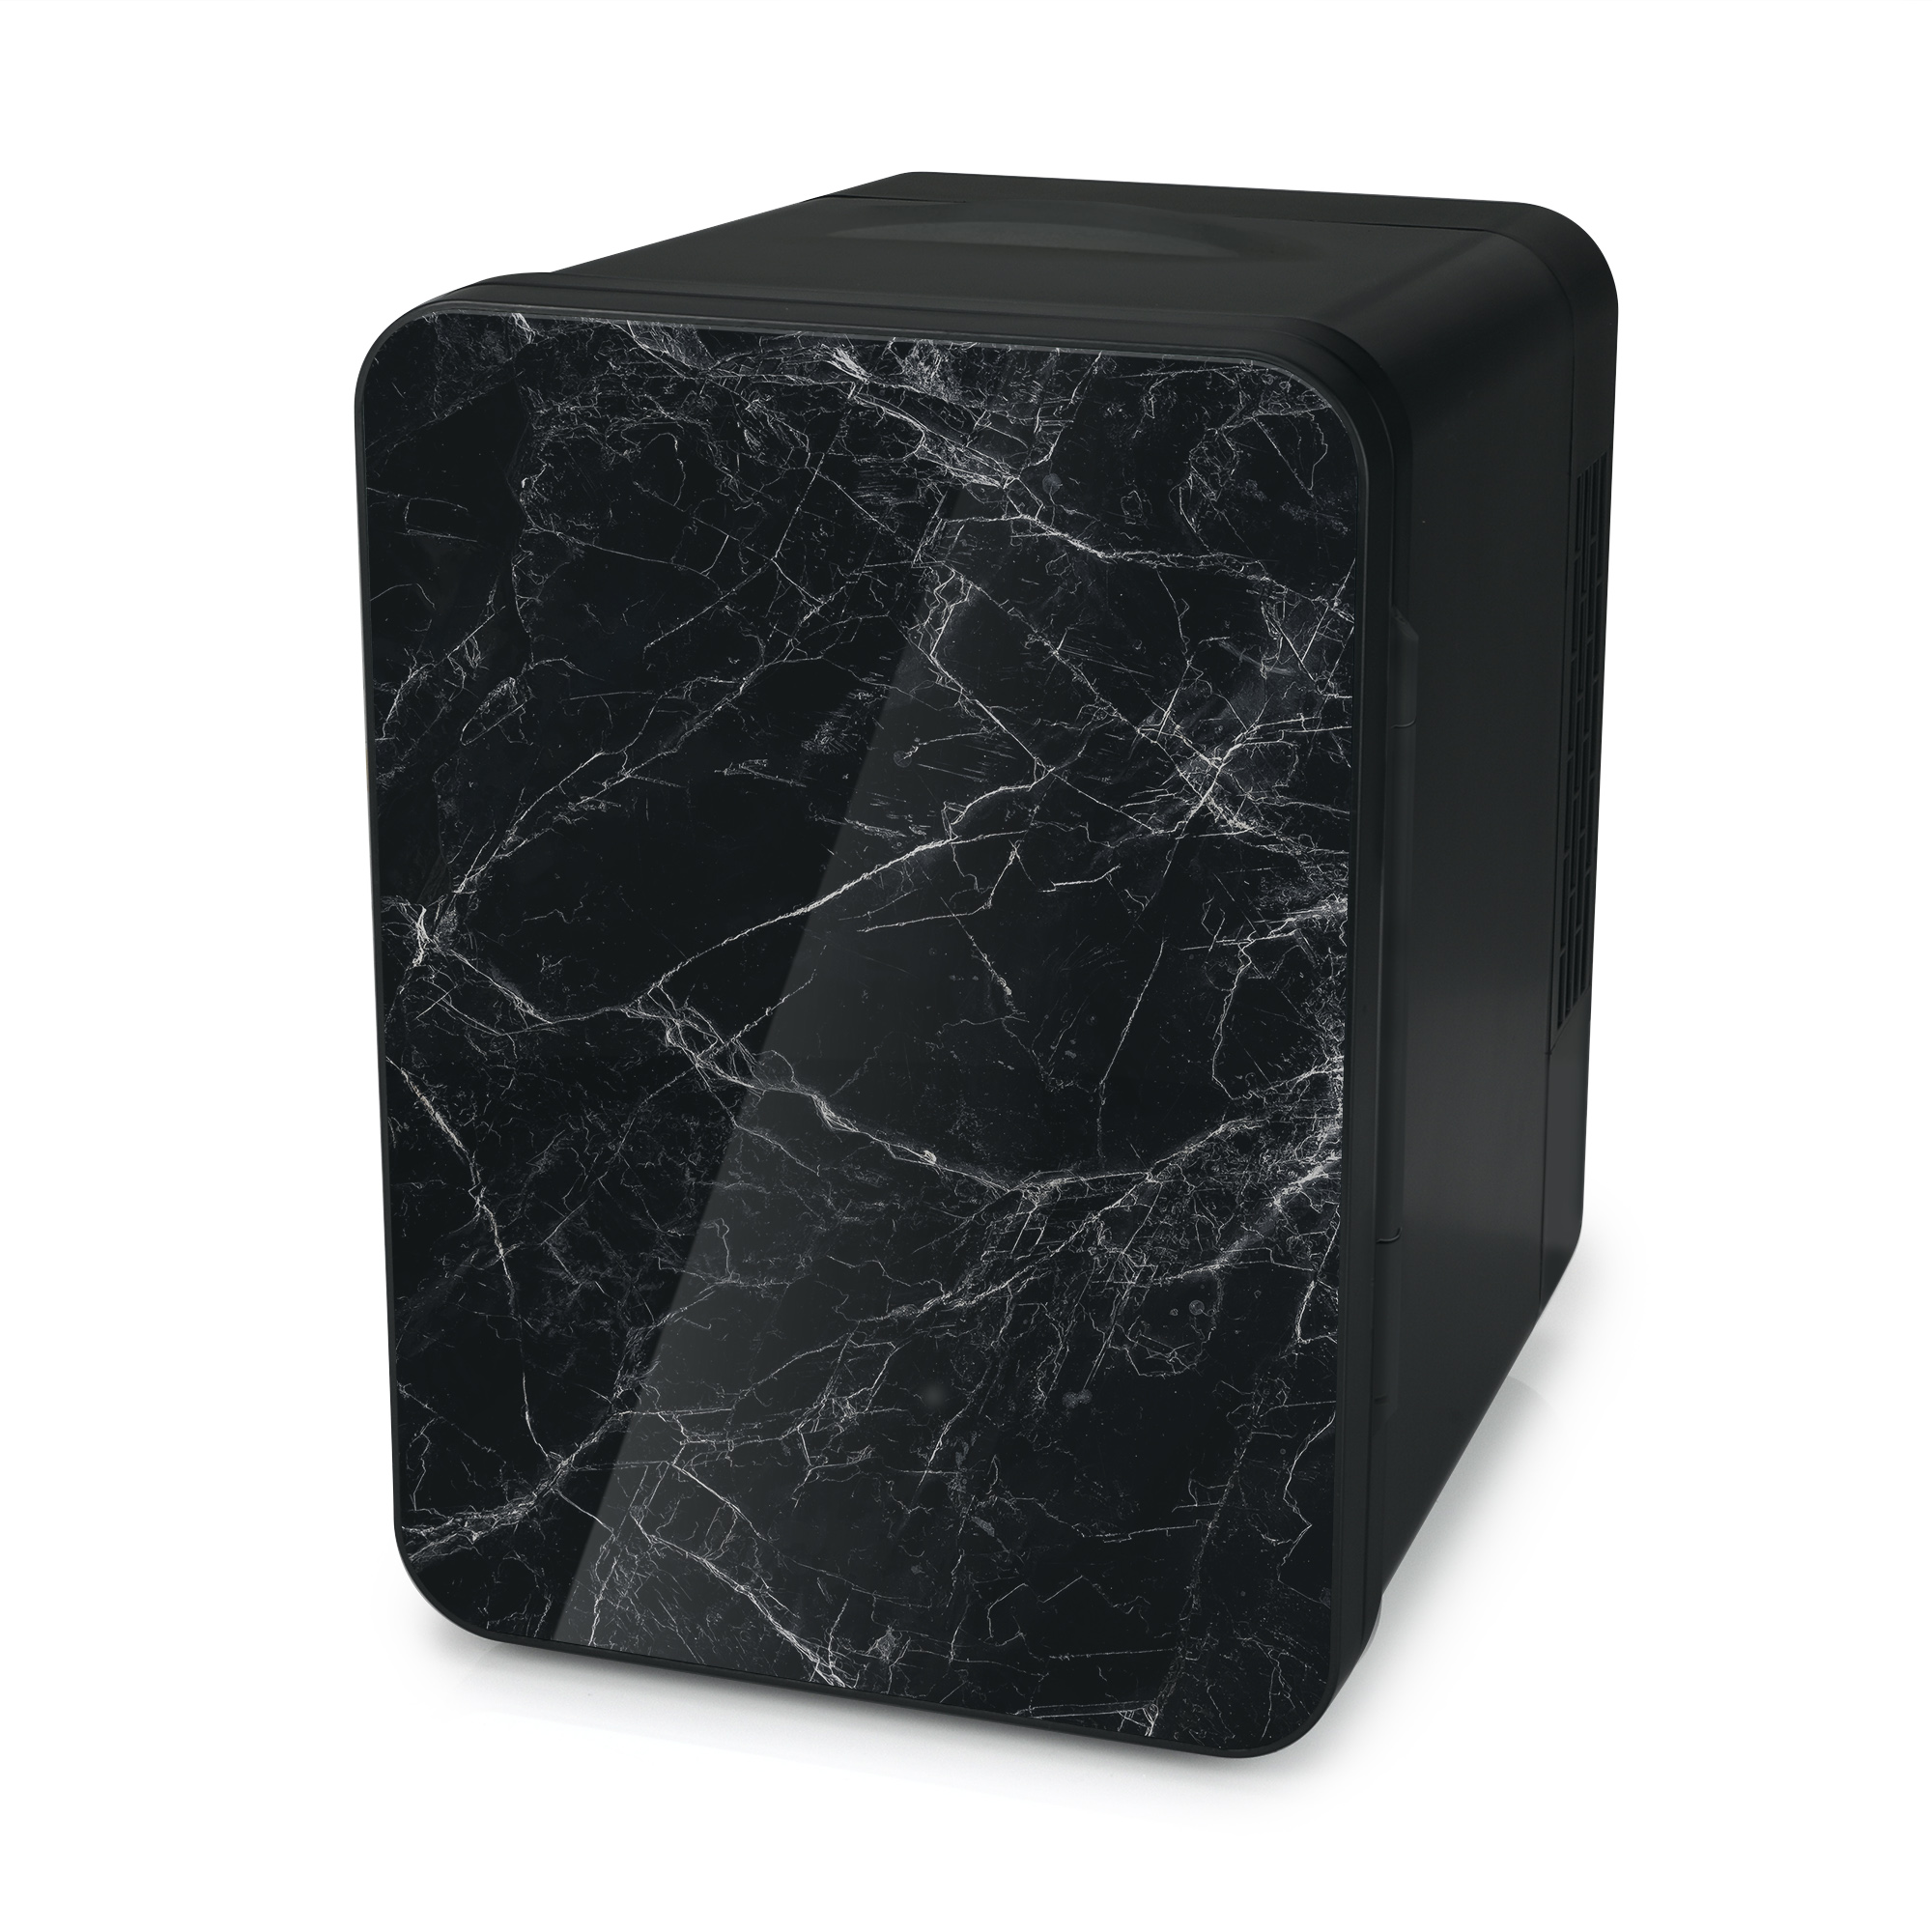 Personal Chiller Mini Fridge Small Space Cooler, Black Marble - image 1 of 11